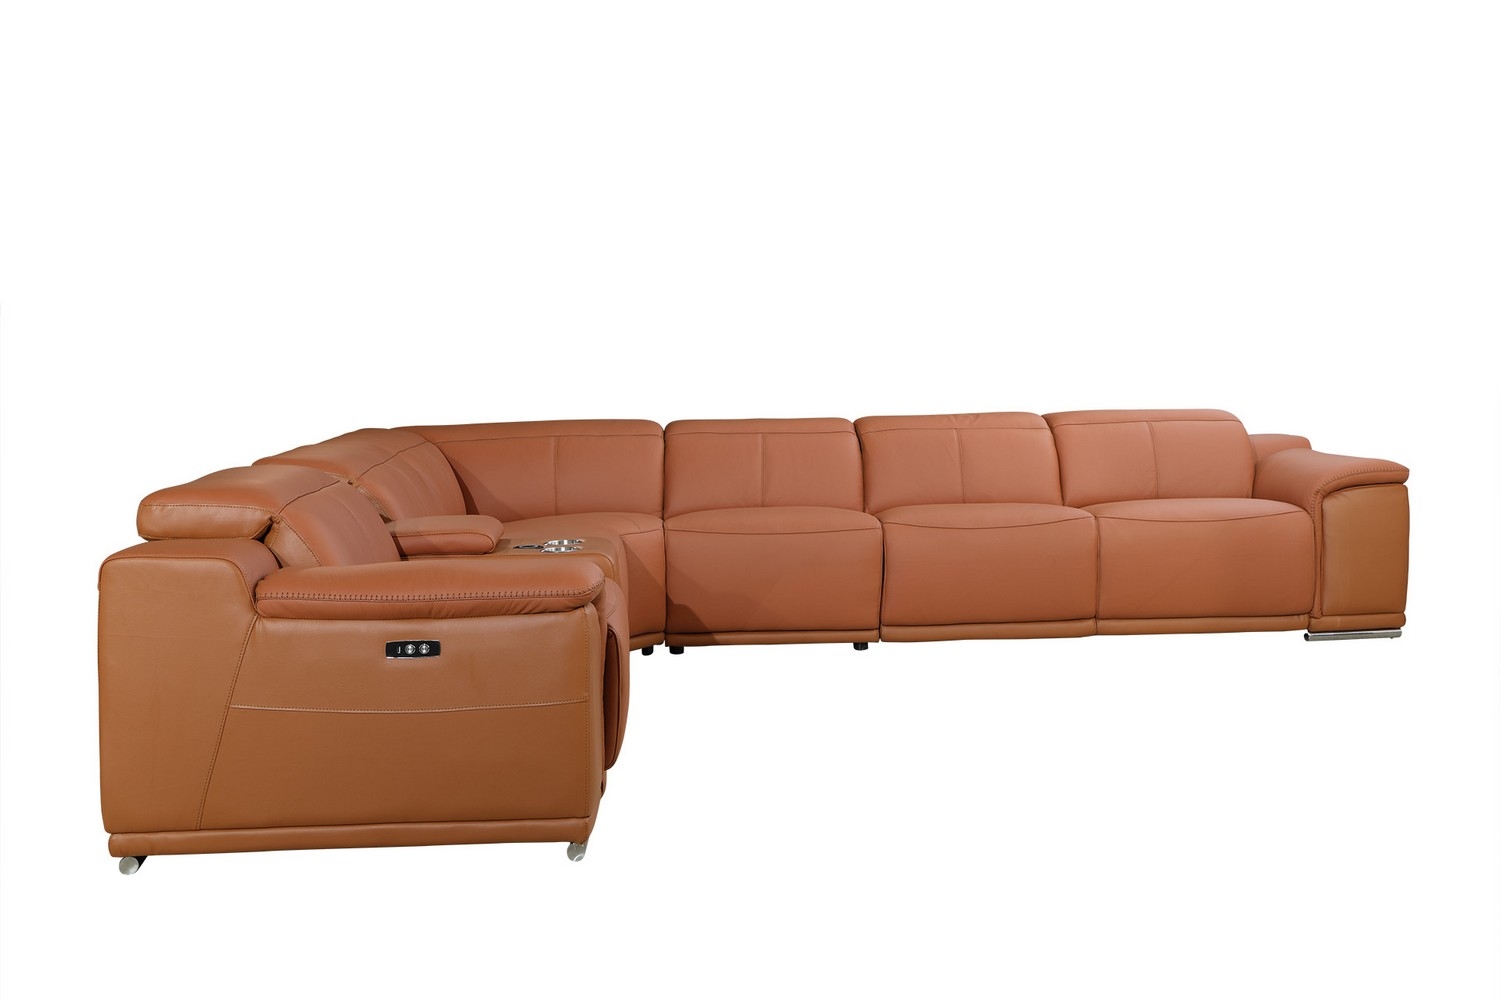 241" X 280" X 220.2" Camel Power Reclining 7PC Sectional